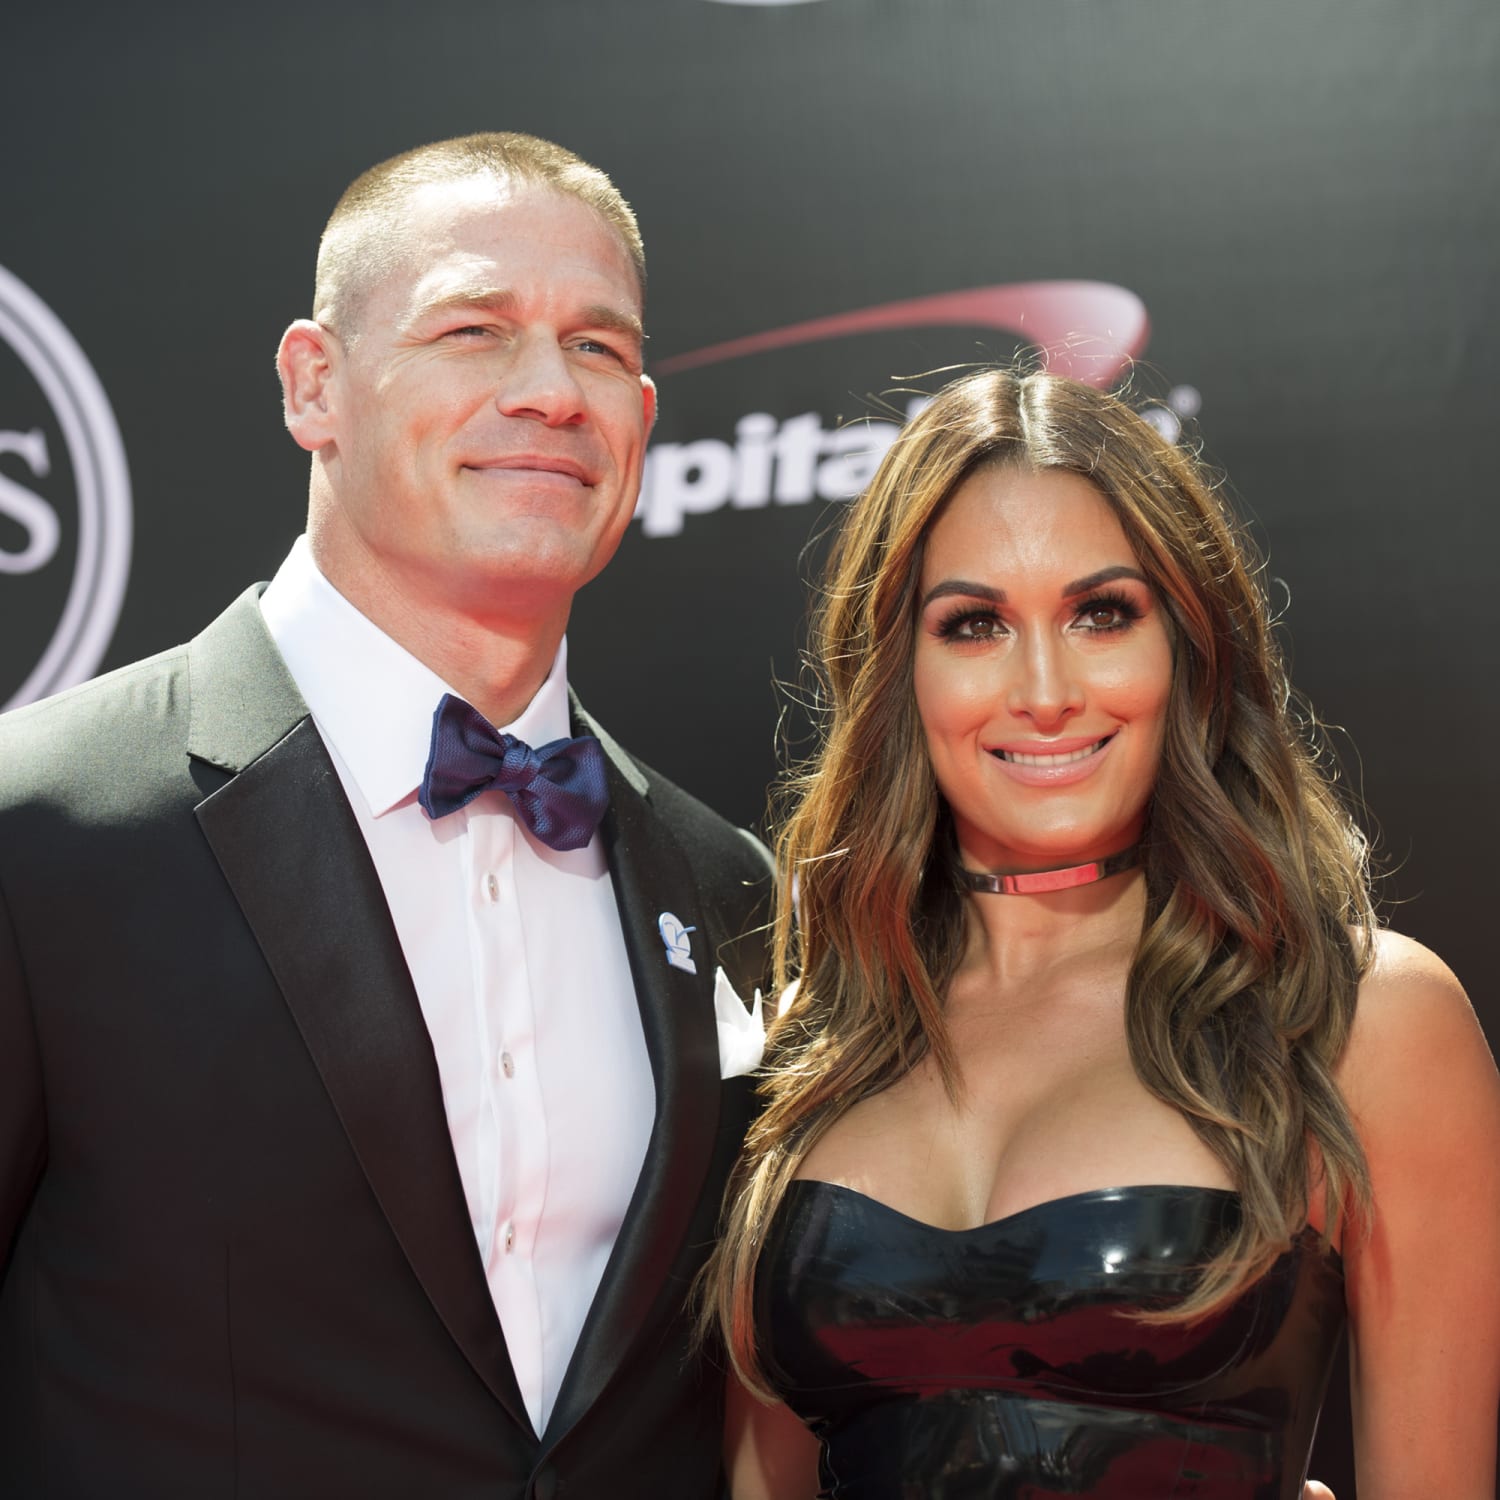 Nikki Bella Rocks Her Wrestling Outfit With Baby Bump In New Pic